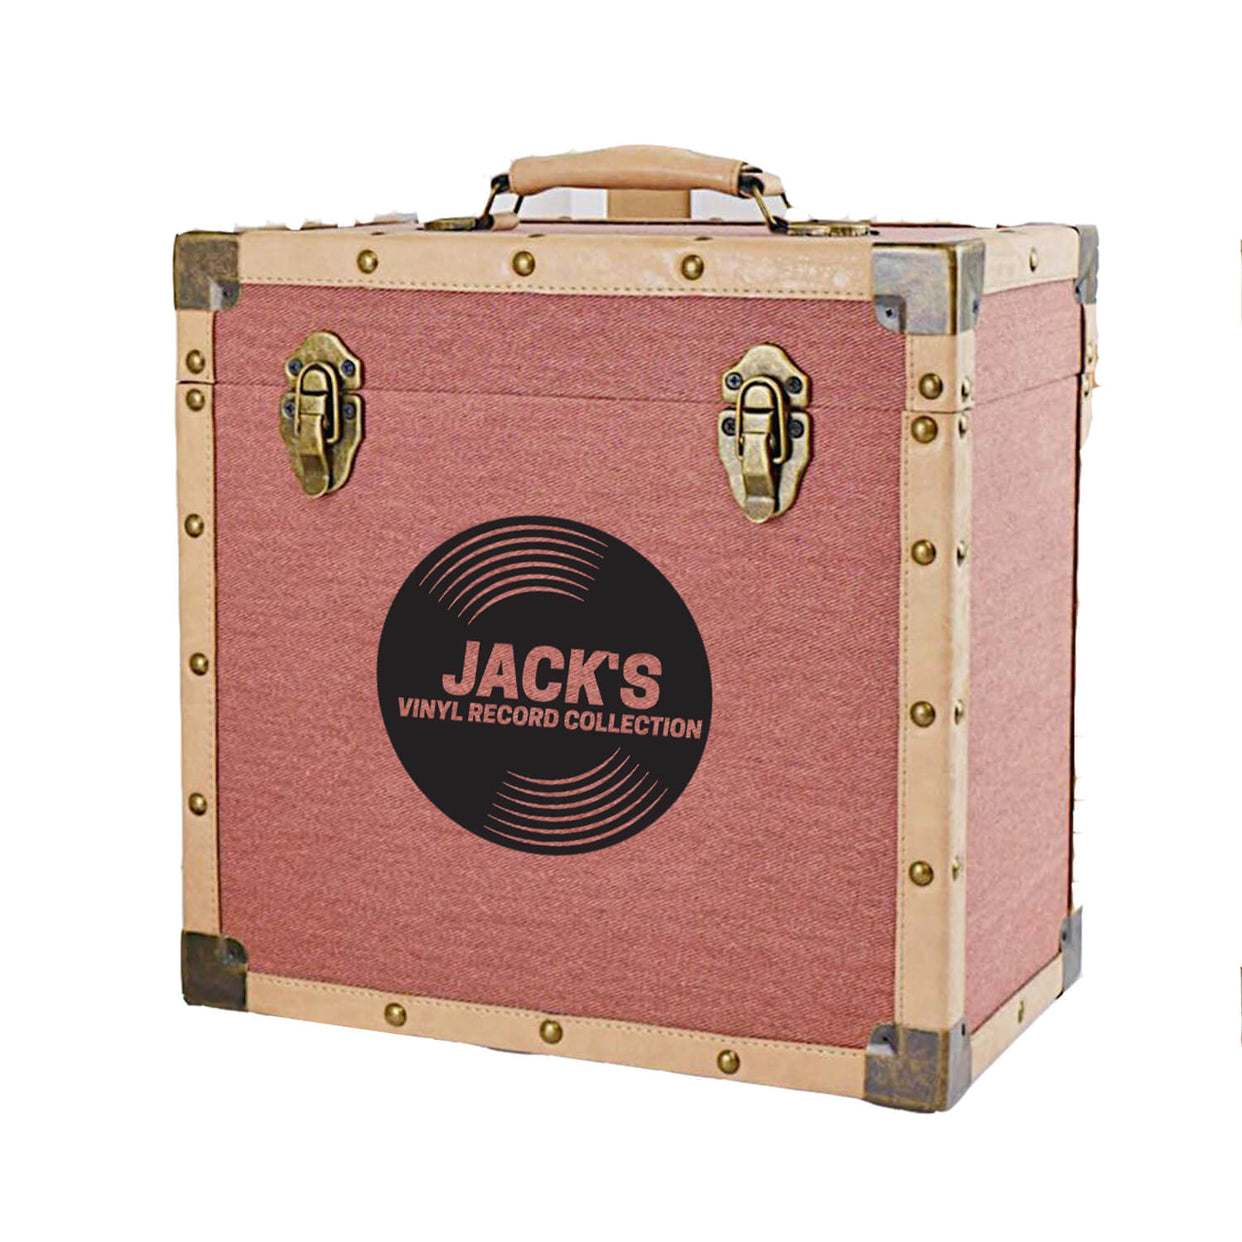 Personalised Music Record Vinyl Storage Box - 12 inch - Burgundy Cloth - Stores up to 50 records